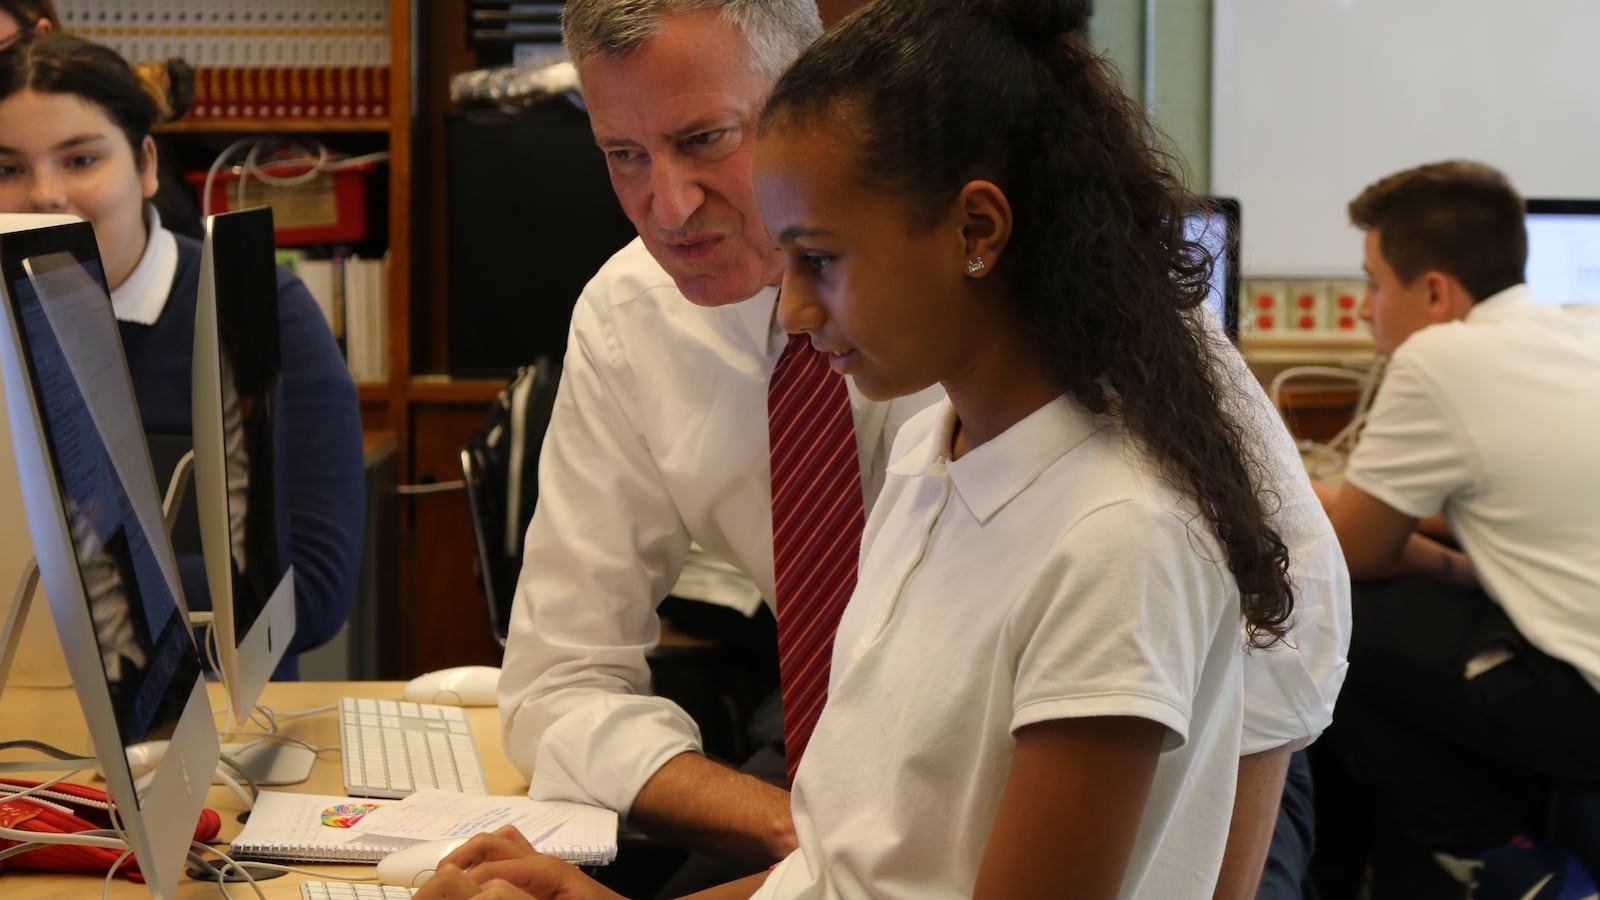 Mayor Bill de Blasio learns about computer science from a student at the Laboratory School of Finance and Technology in the Bronx.